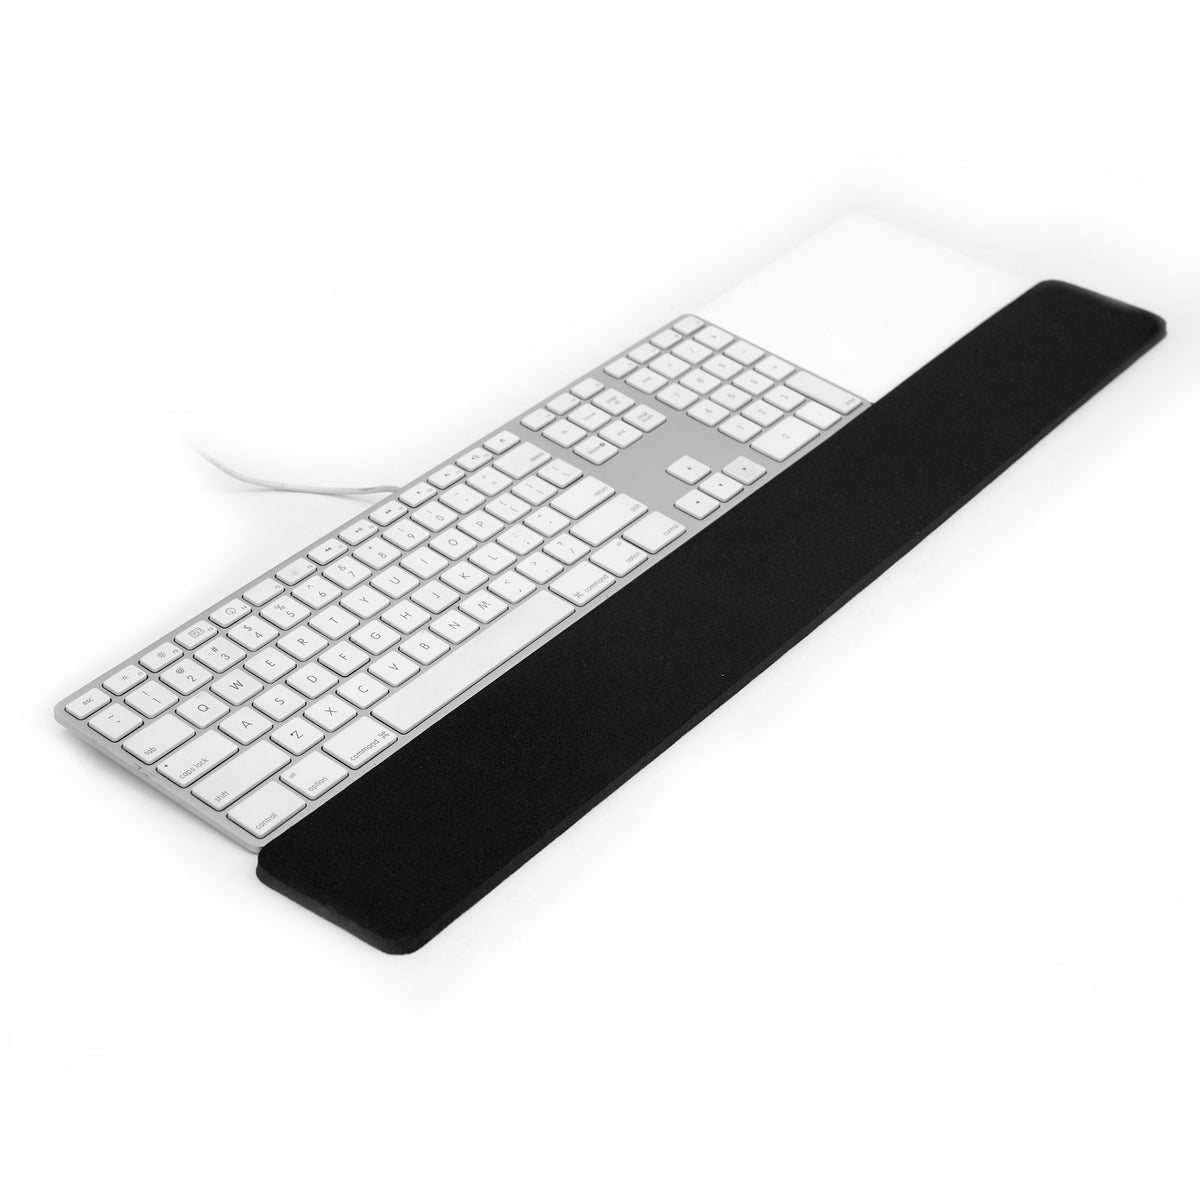 Grifiti Slim Wrist Pad 24 Inch for Thin Apple Wired Keyboard and Track